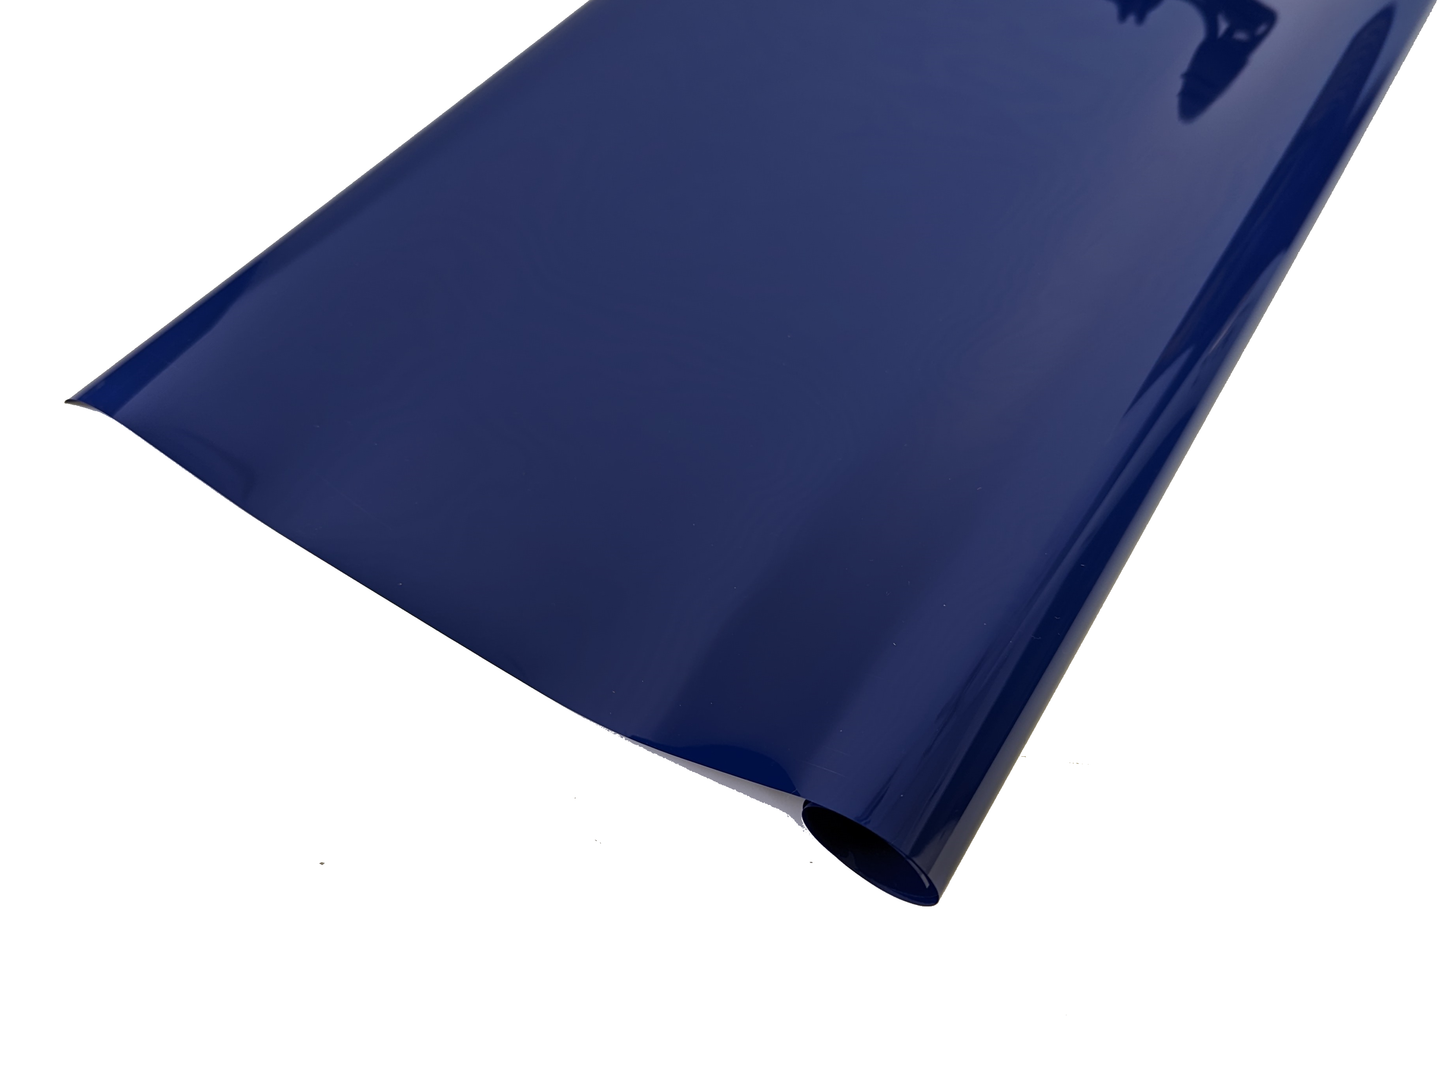 Flight Film covering Material, Heat shrink RC airplane covering - Deep Blue